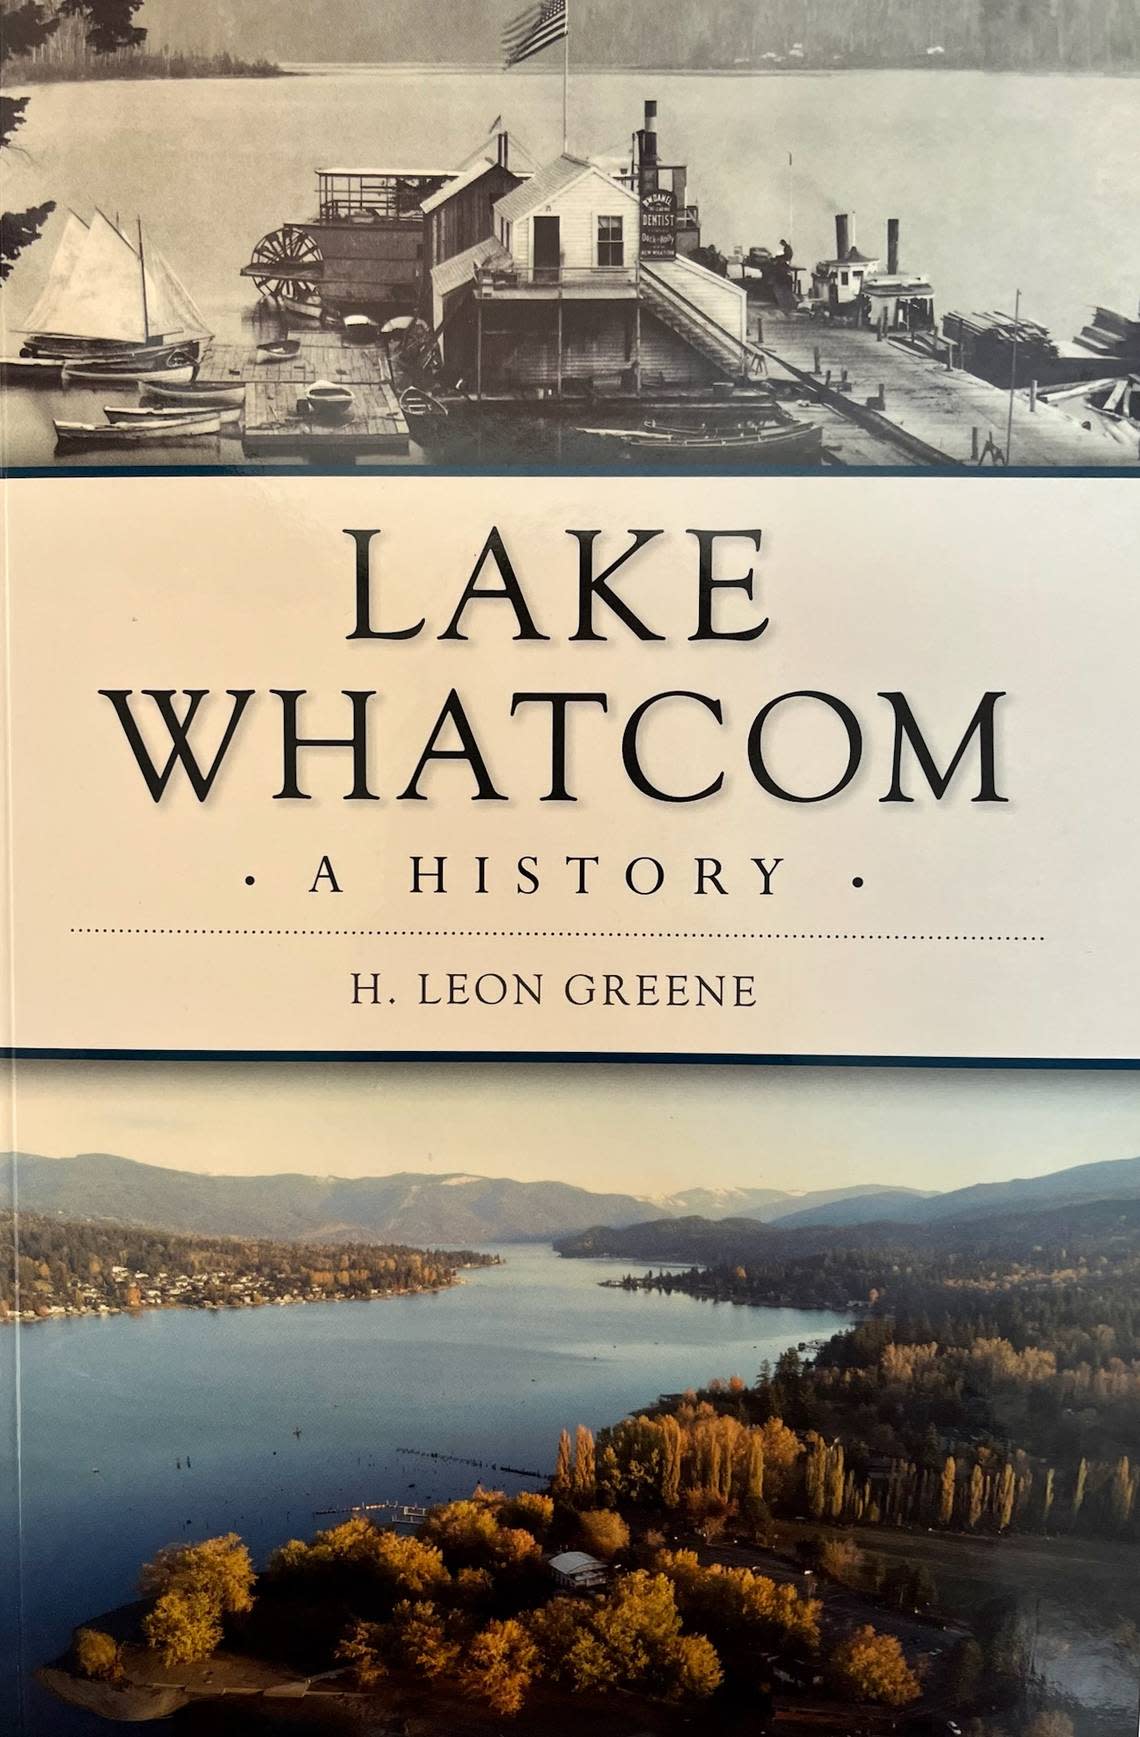 Local author H. Leon Greene wrote a book detailing the history of Lake Whatcom. Daniel Schrager/Book courtesy of H. Leon Greene